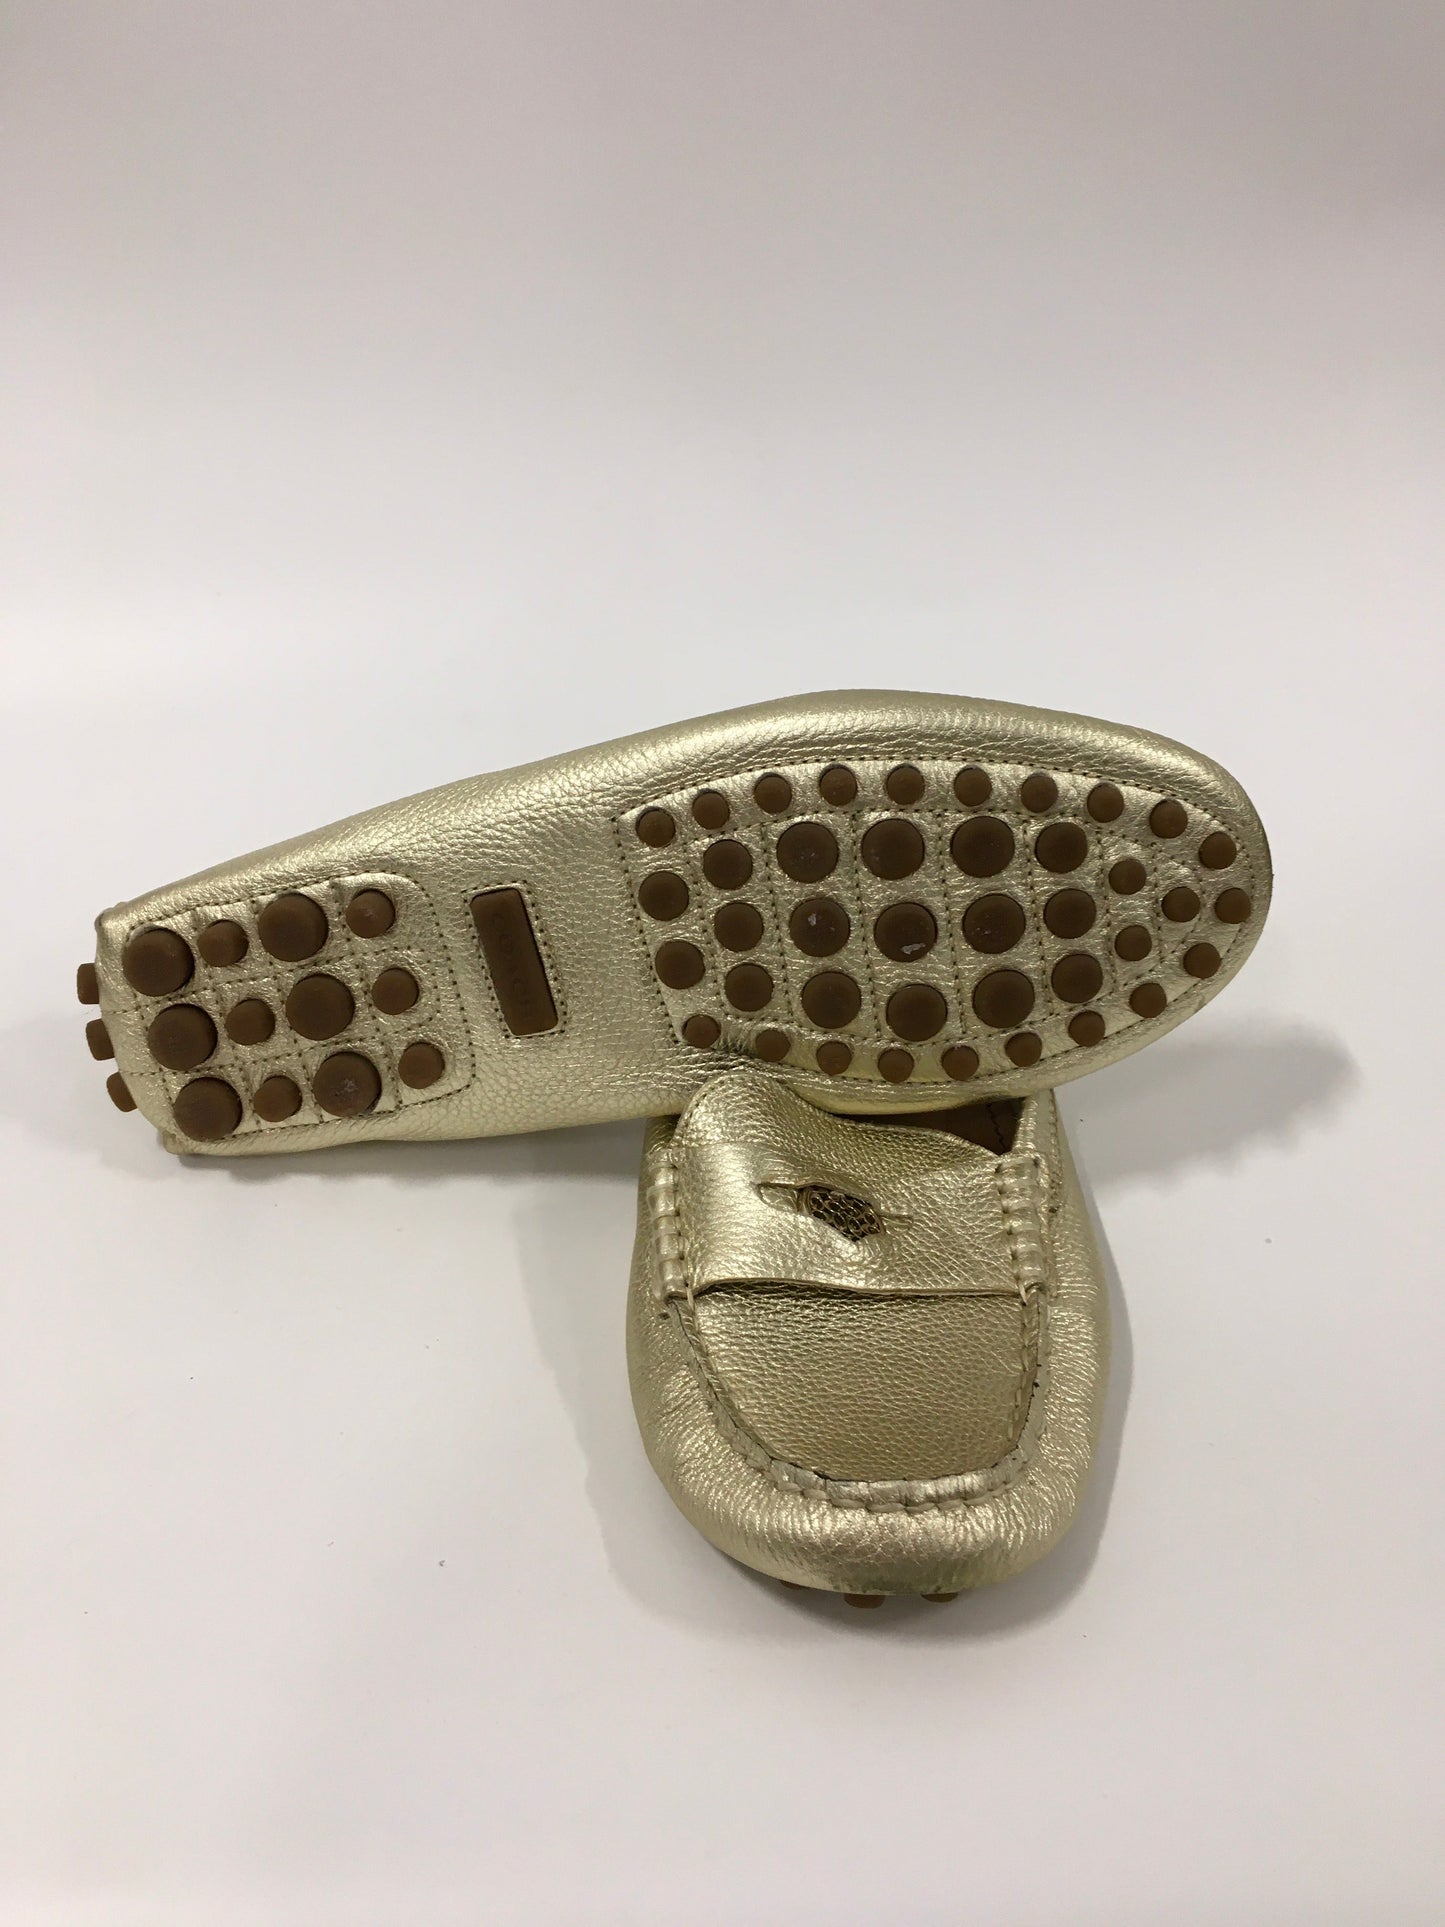 Gold Shoes Flats Loafer Oxford Coach, Size 8